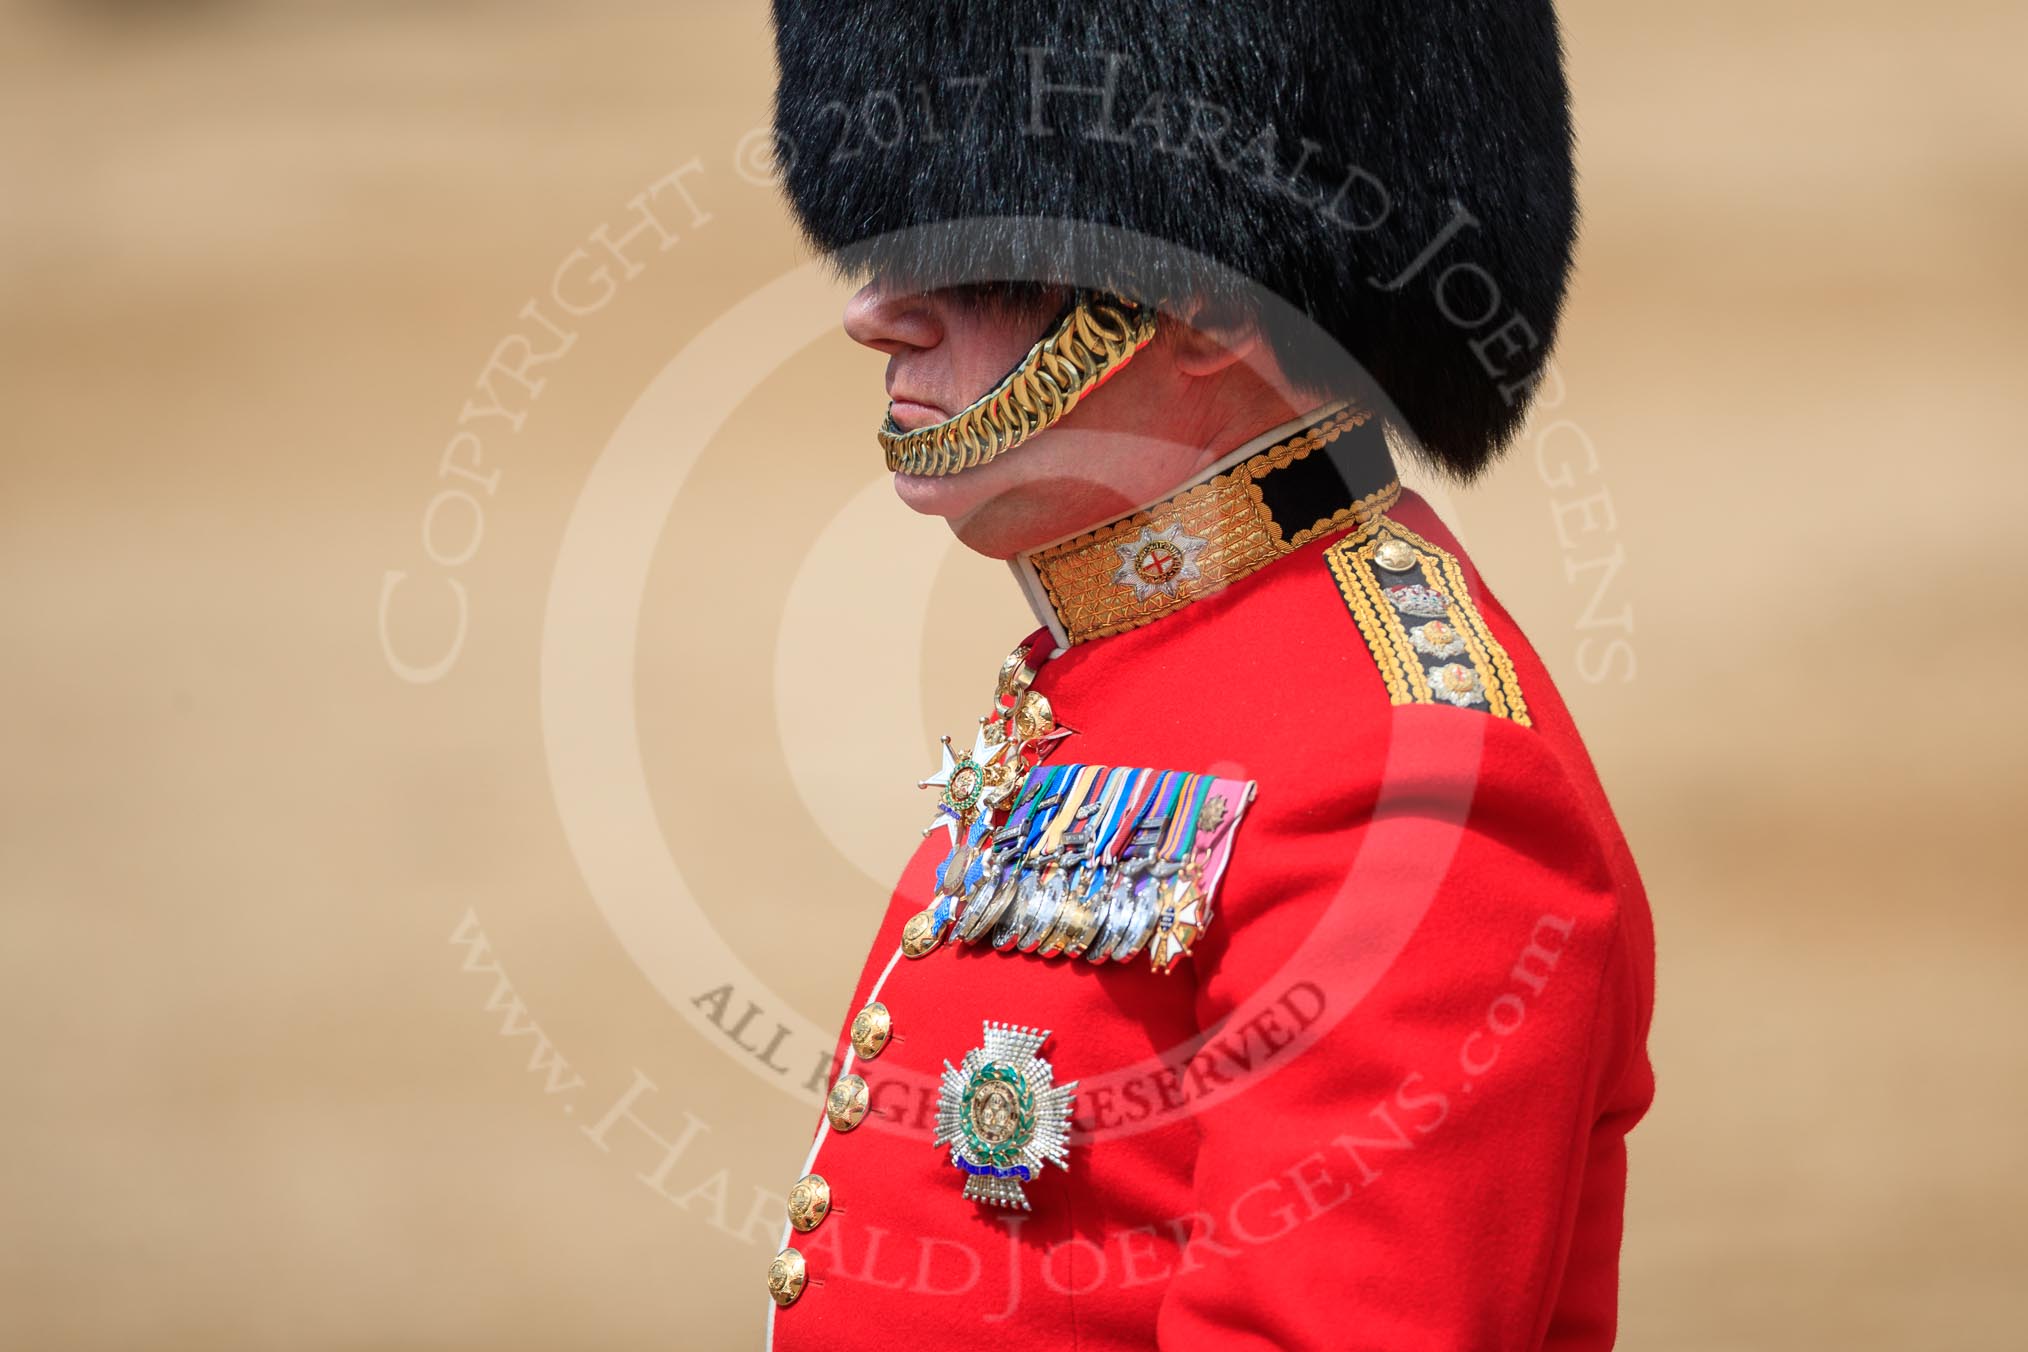 during The Colonel's Review {iptcyear4} (final rehearsal for Trooping the Colour, The Queen's Birthday Parade)  at Horse Guards Parade, Westminster, London, 2 June 2018, 12:14.